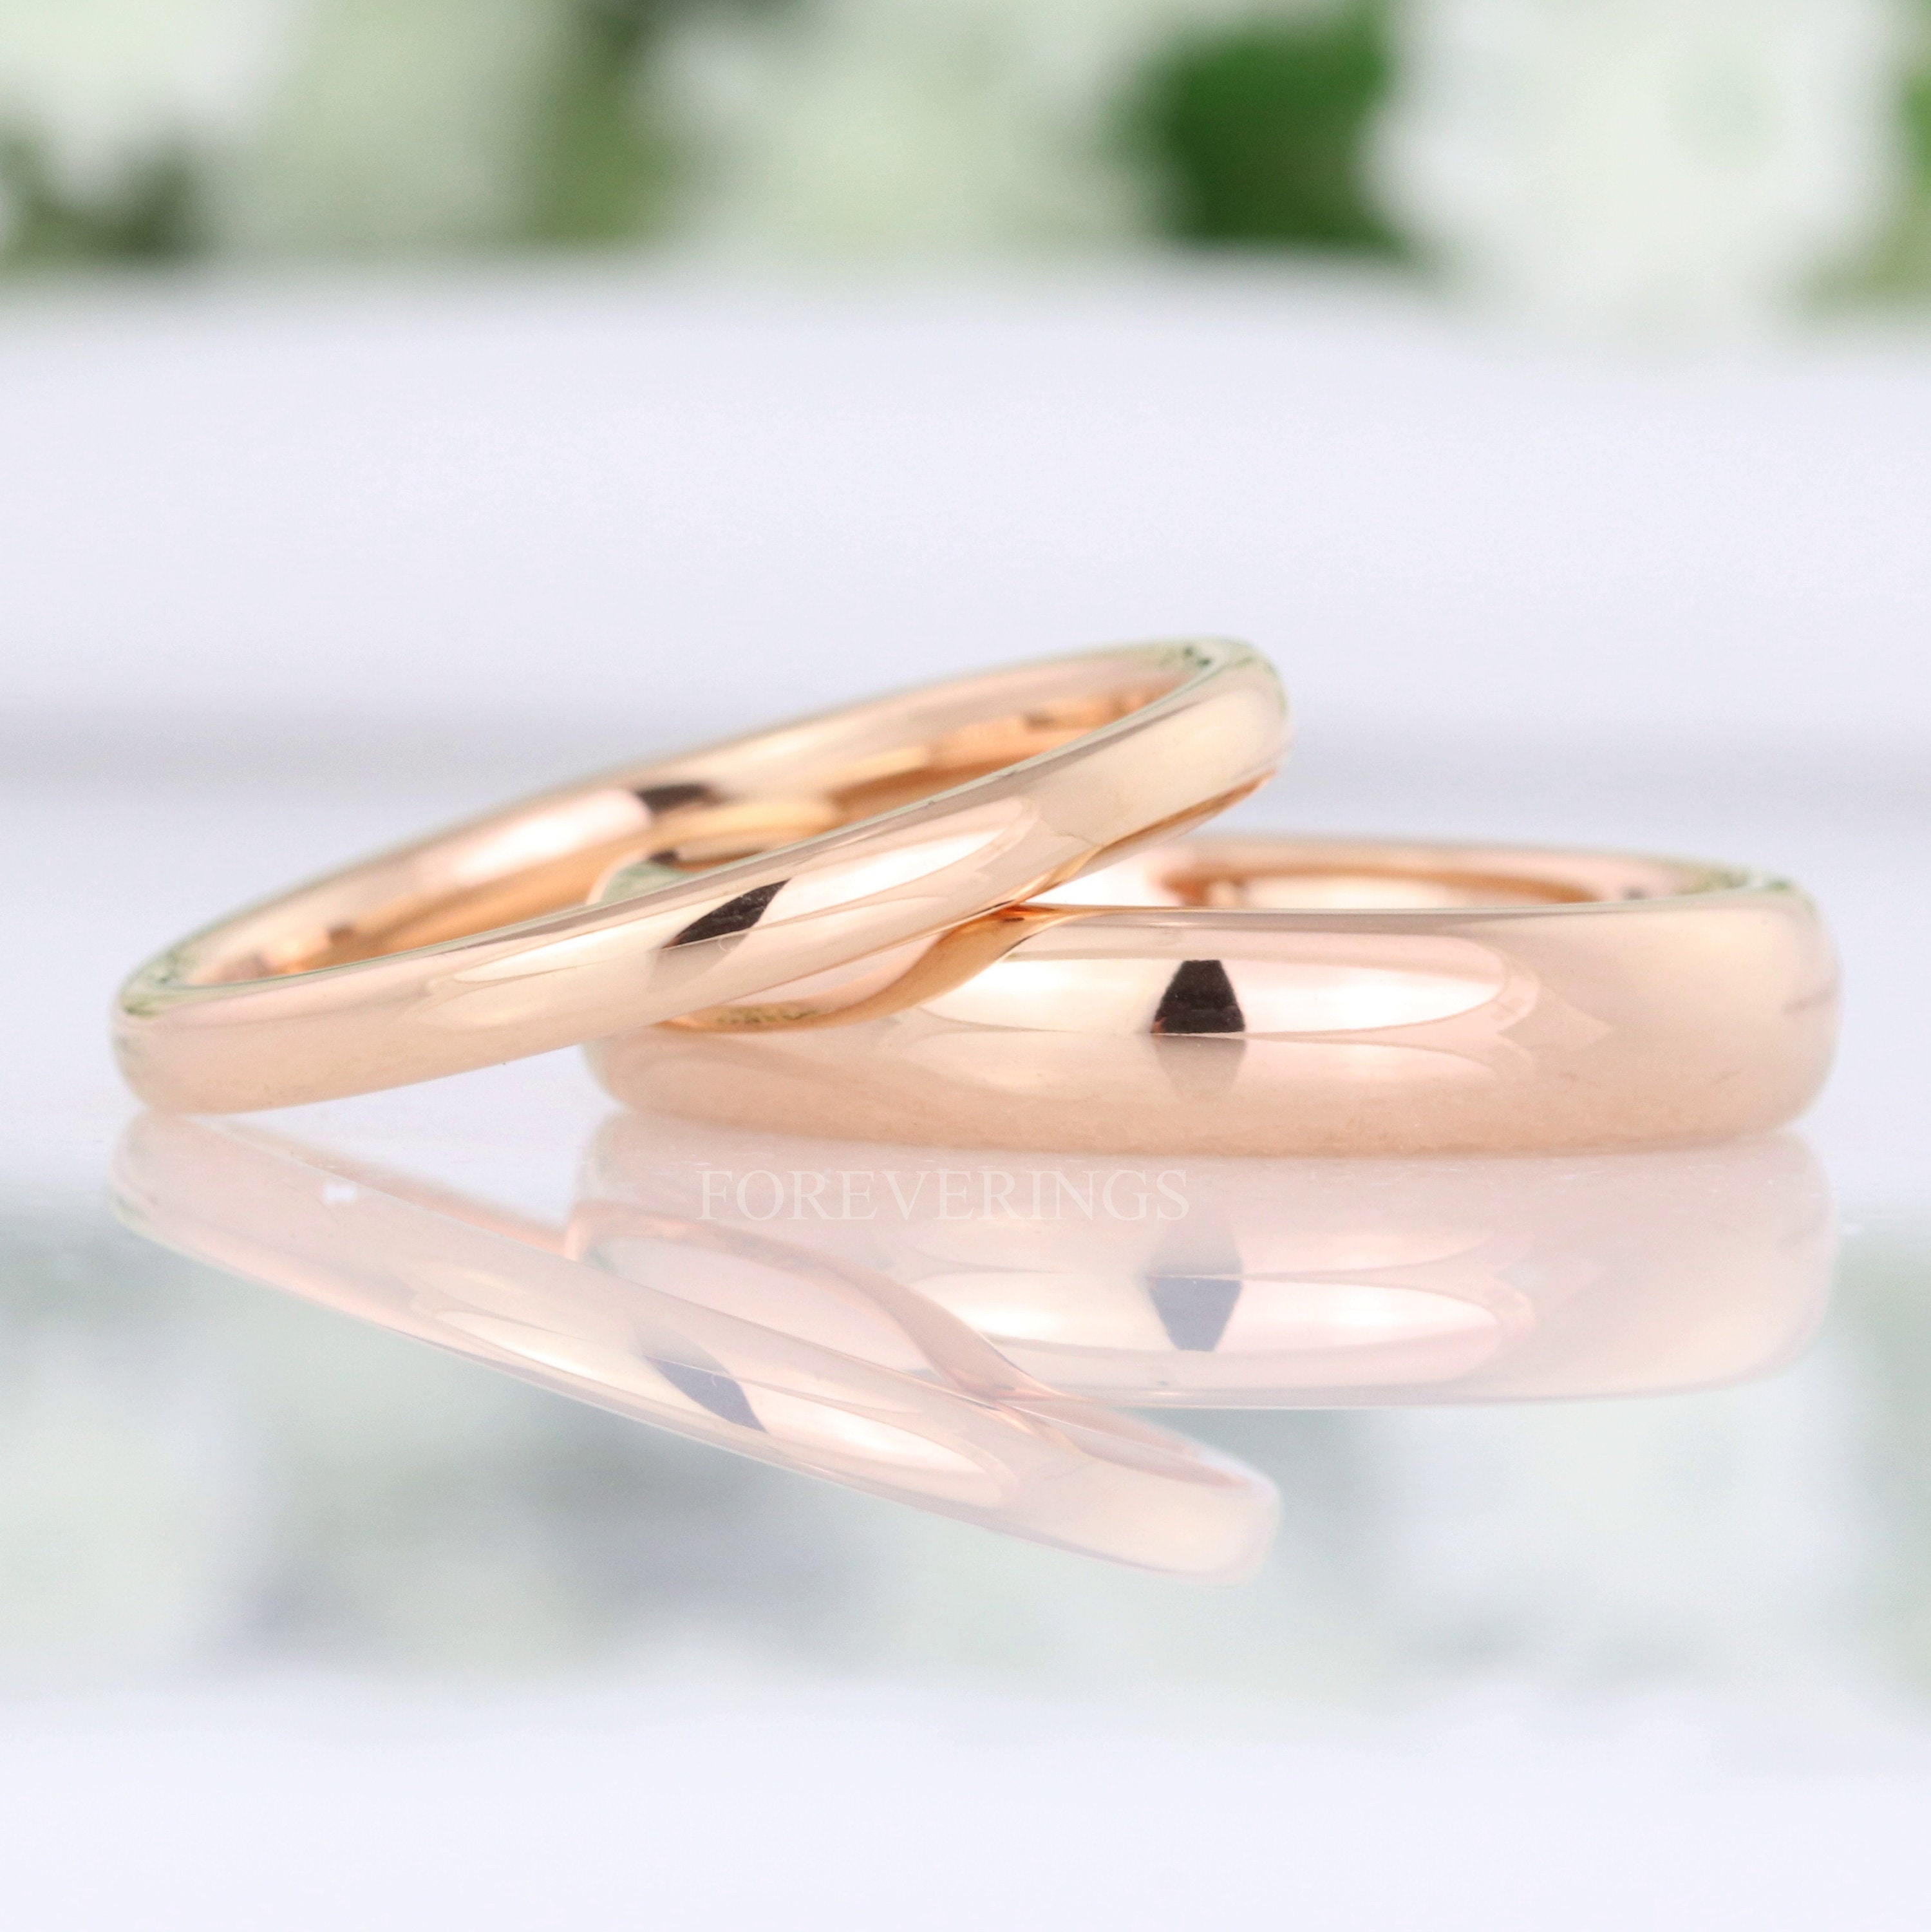 14k Rose Gold Polished 2mm Band Best Quality Free Gift Box